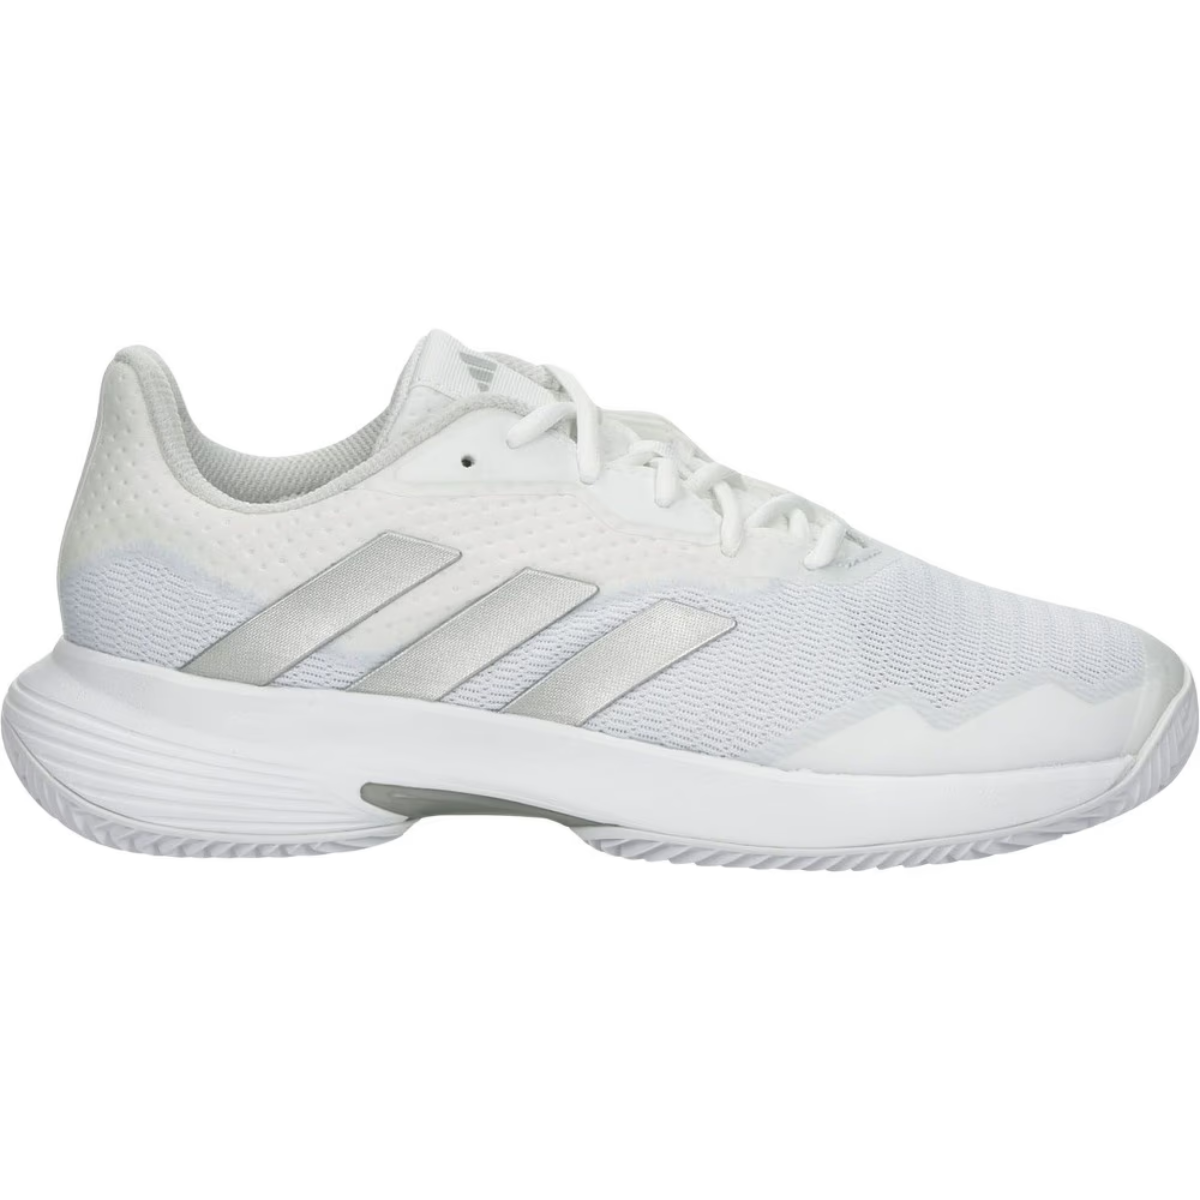 Chaussures Adidas CourtJam Control W